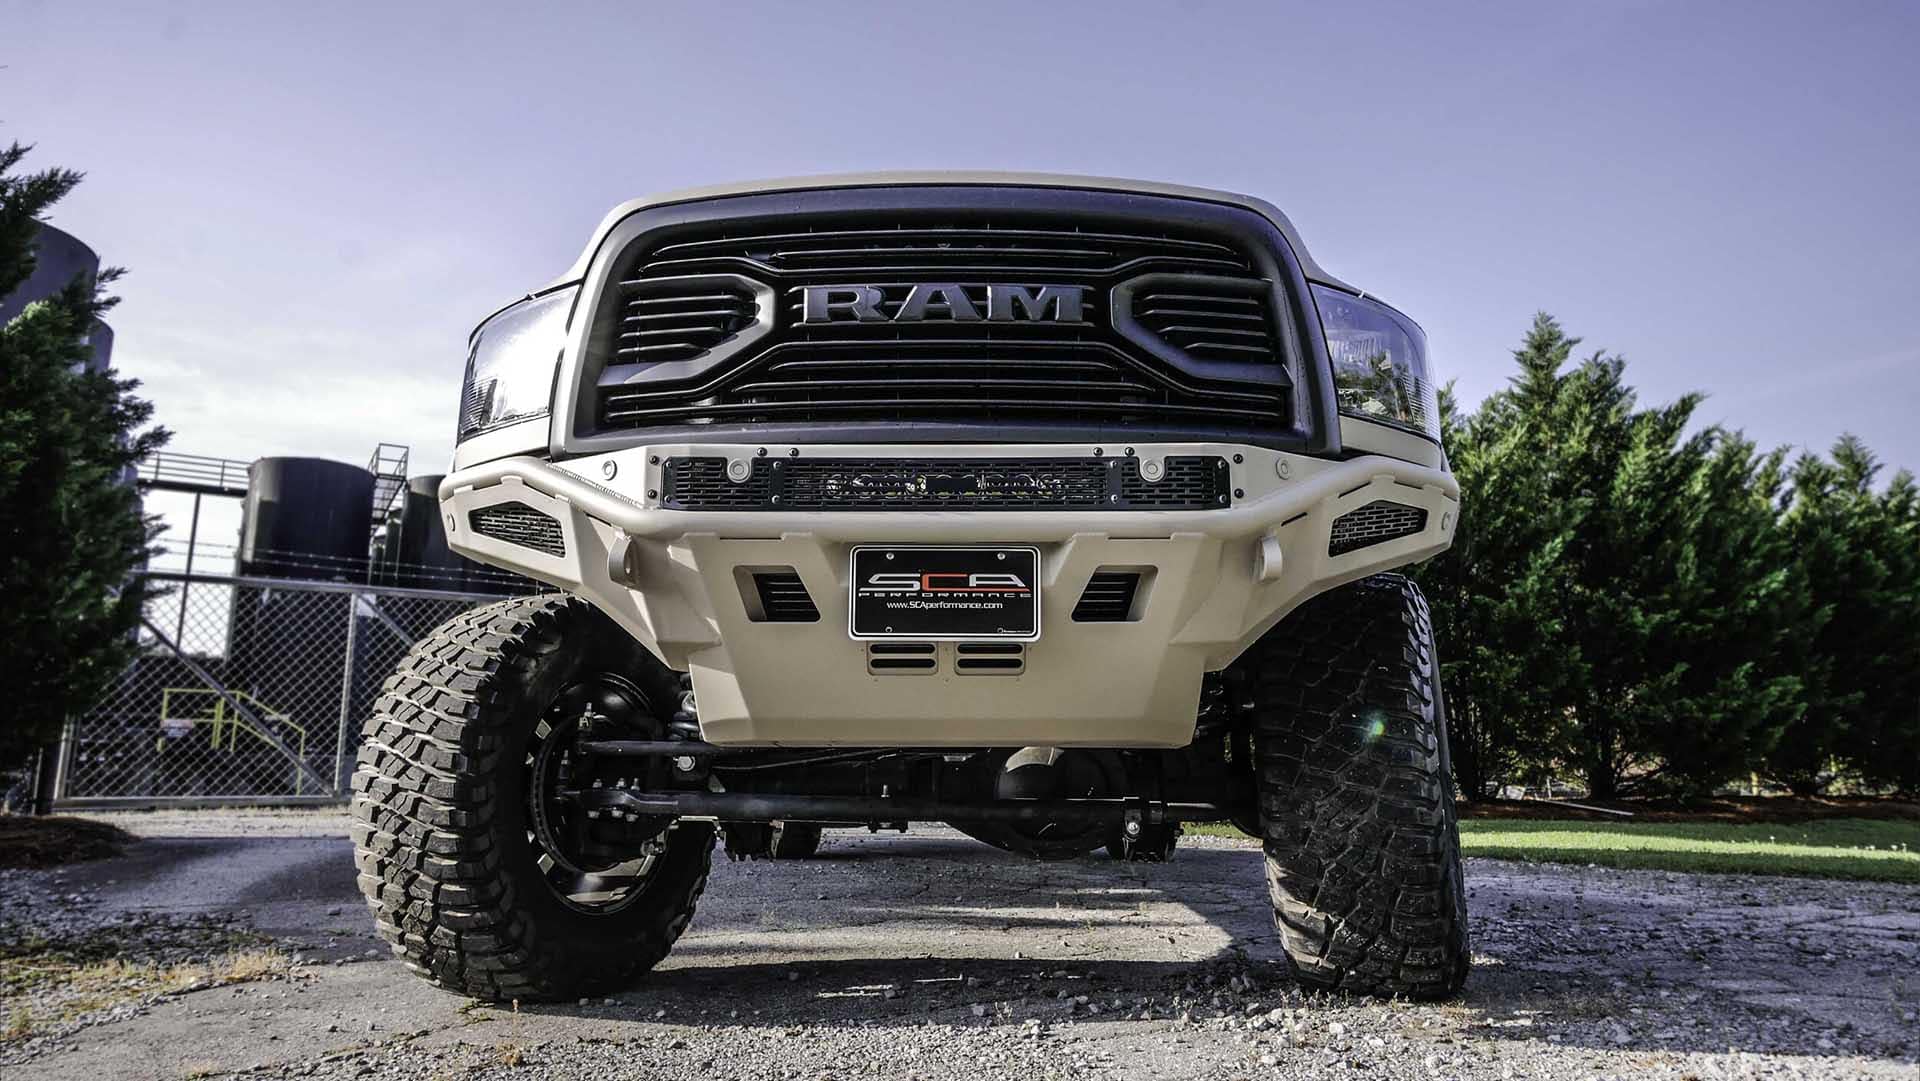 SCA RAM HD Black Widow Lifted Truck with Custom Front Grille.